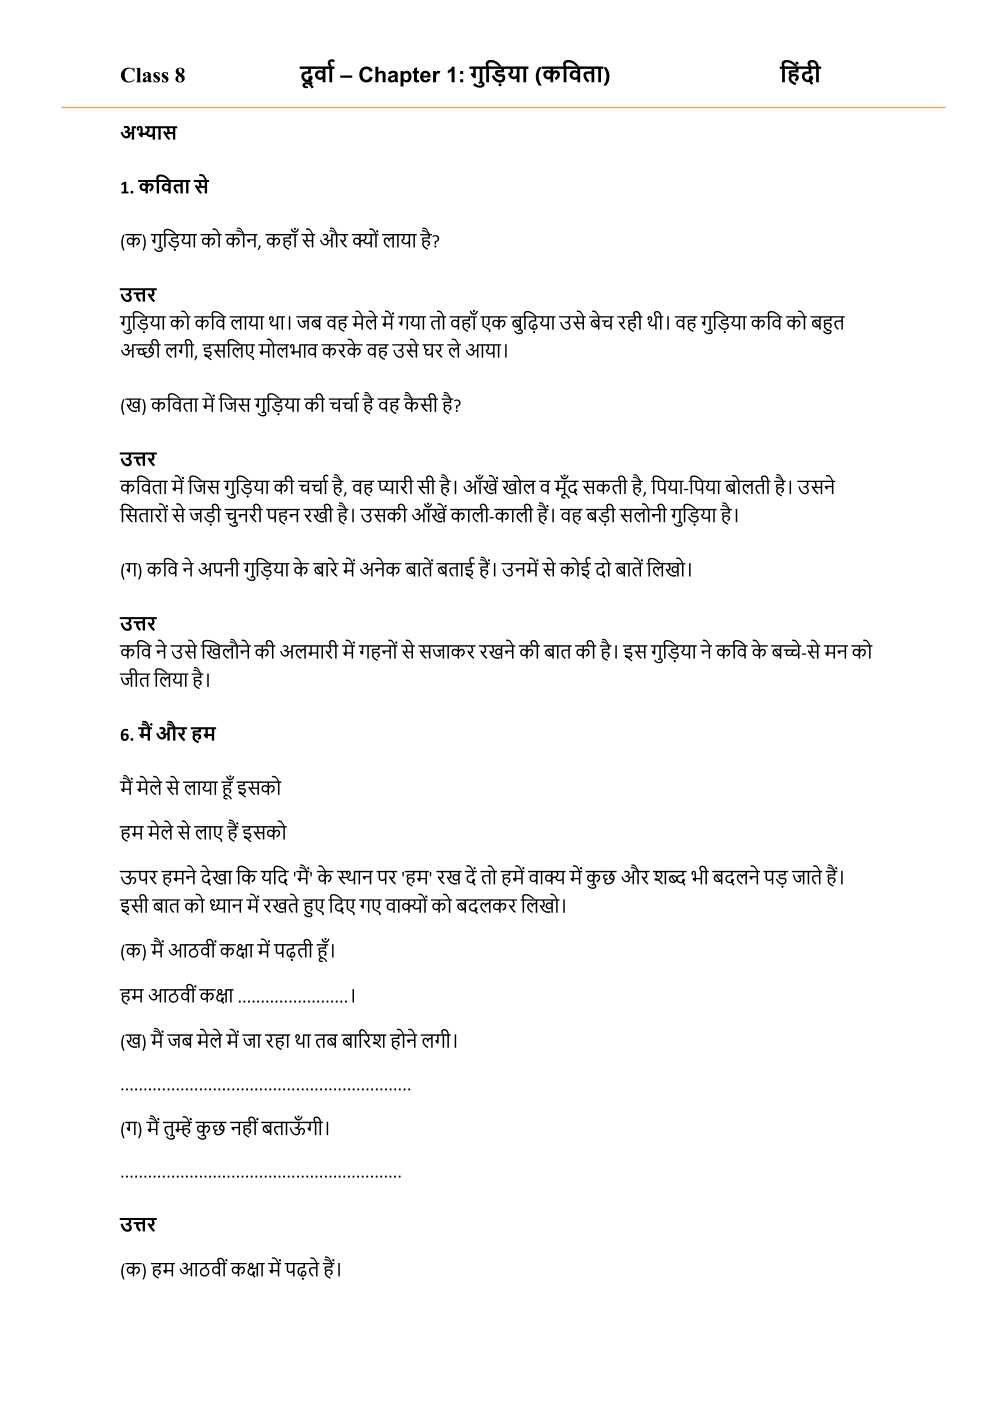 NCERT Solutions For Class 8 Hindi Durva Chapter 1